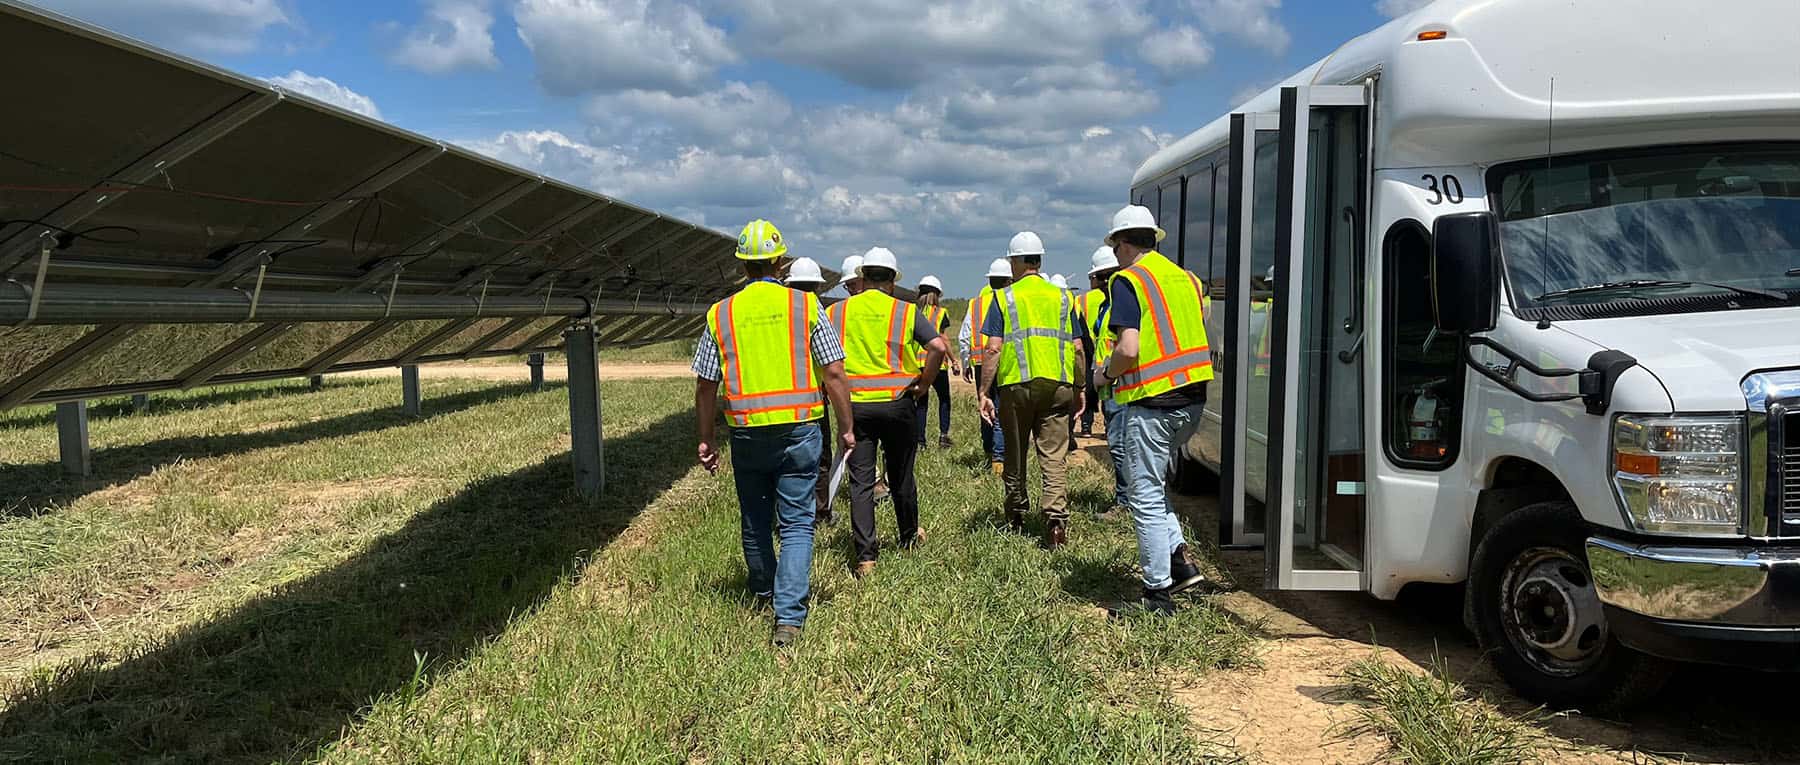 Workers at Ohio solar project